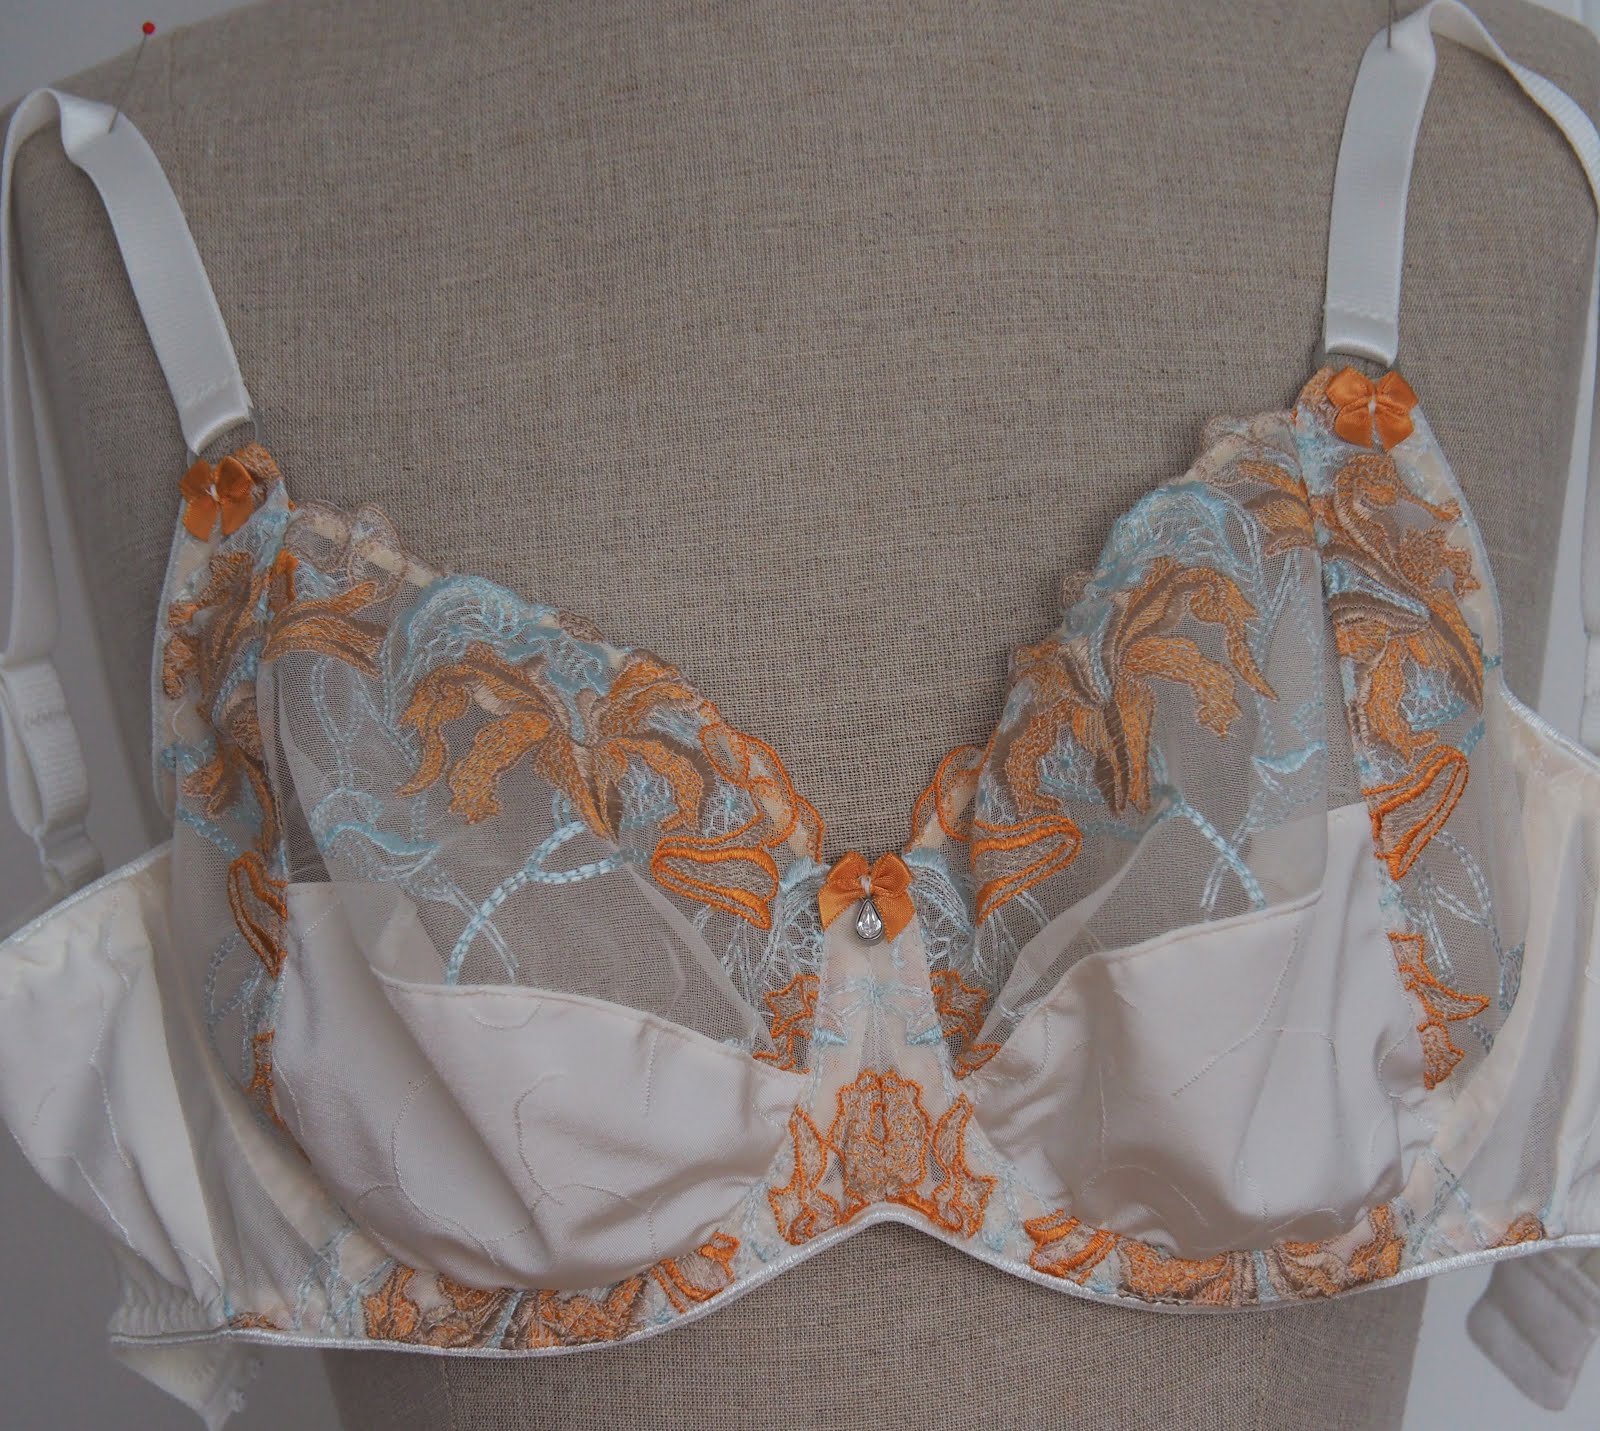 SIGRID - sewing, knitting: Sewing lingerie again